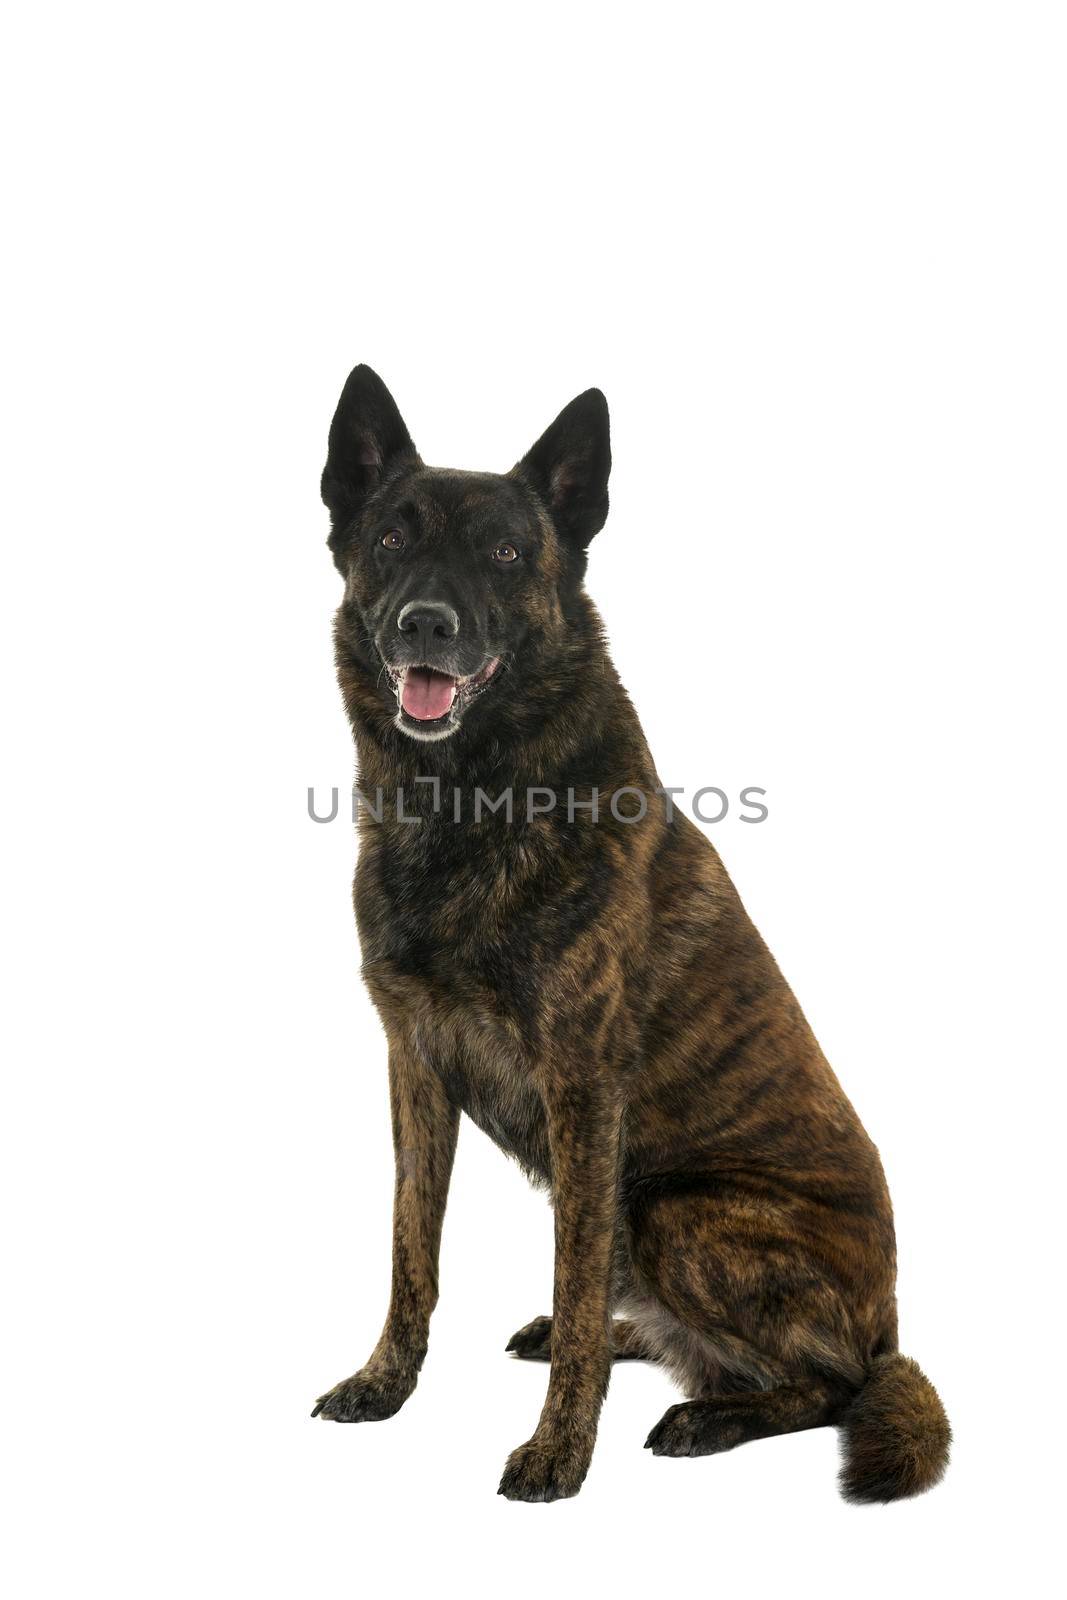 Portrait of a Dutch Shepherd dog, brindle coloring, isolated on white background seen from the front sitting